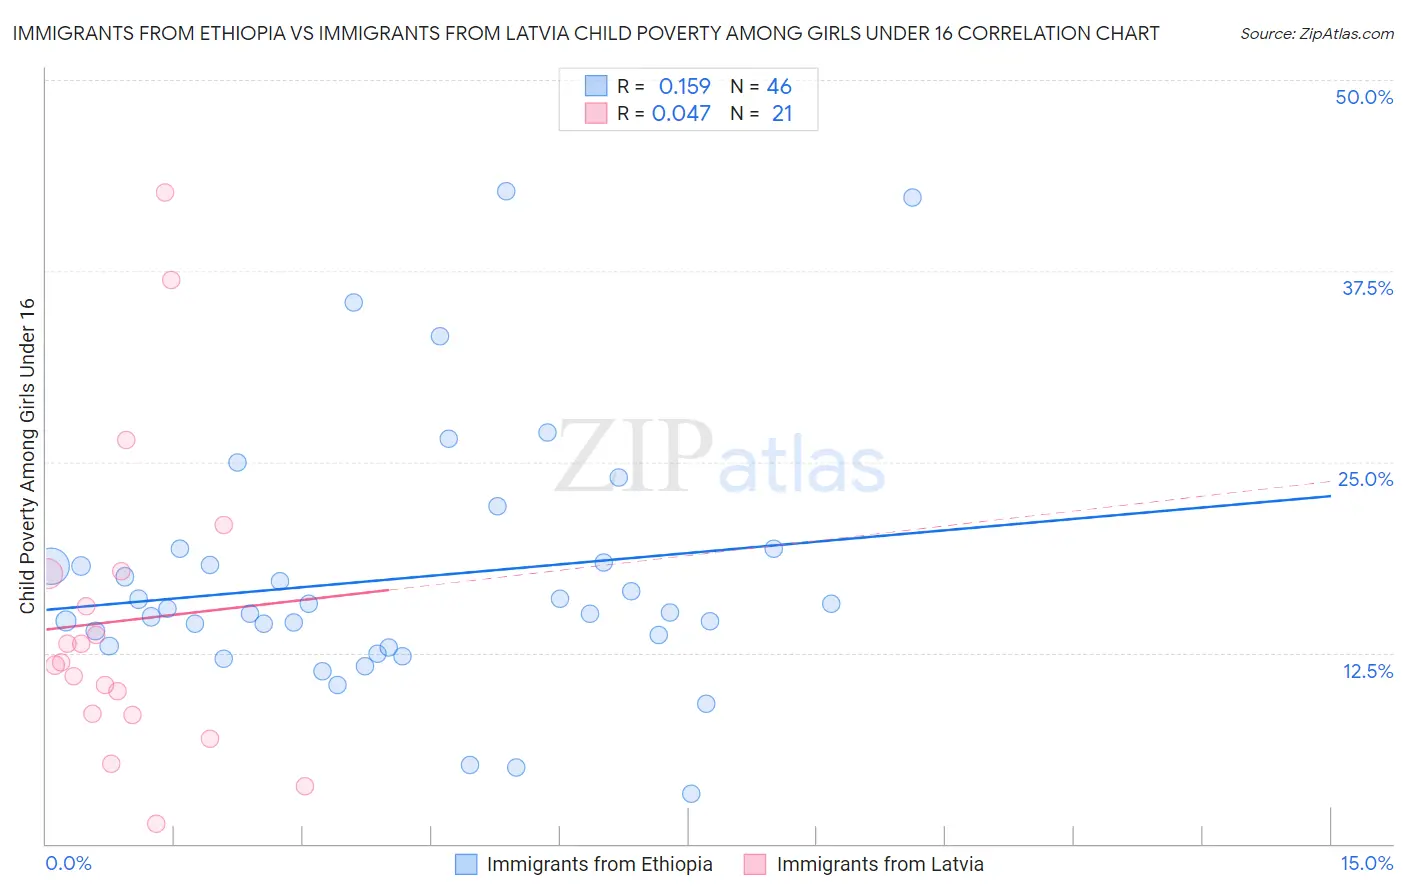 Immigrants from Ethiopia vs Immigrants from Latvia Child Poverty Among Girls Under 16